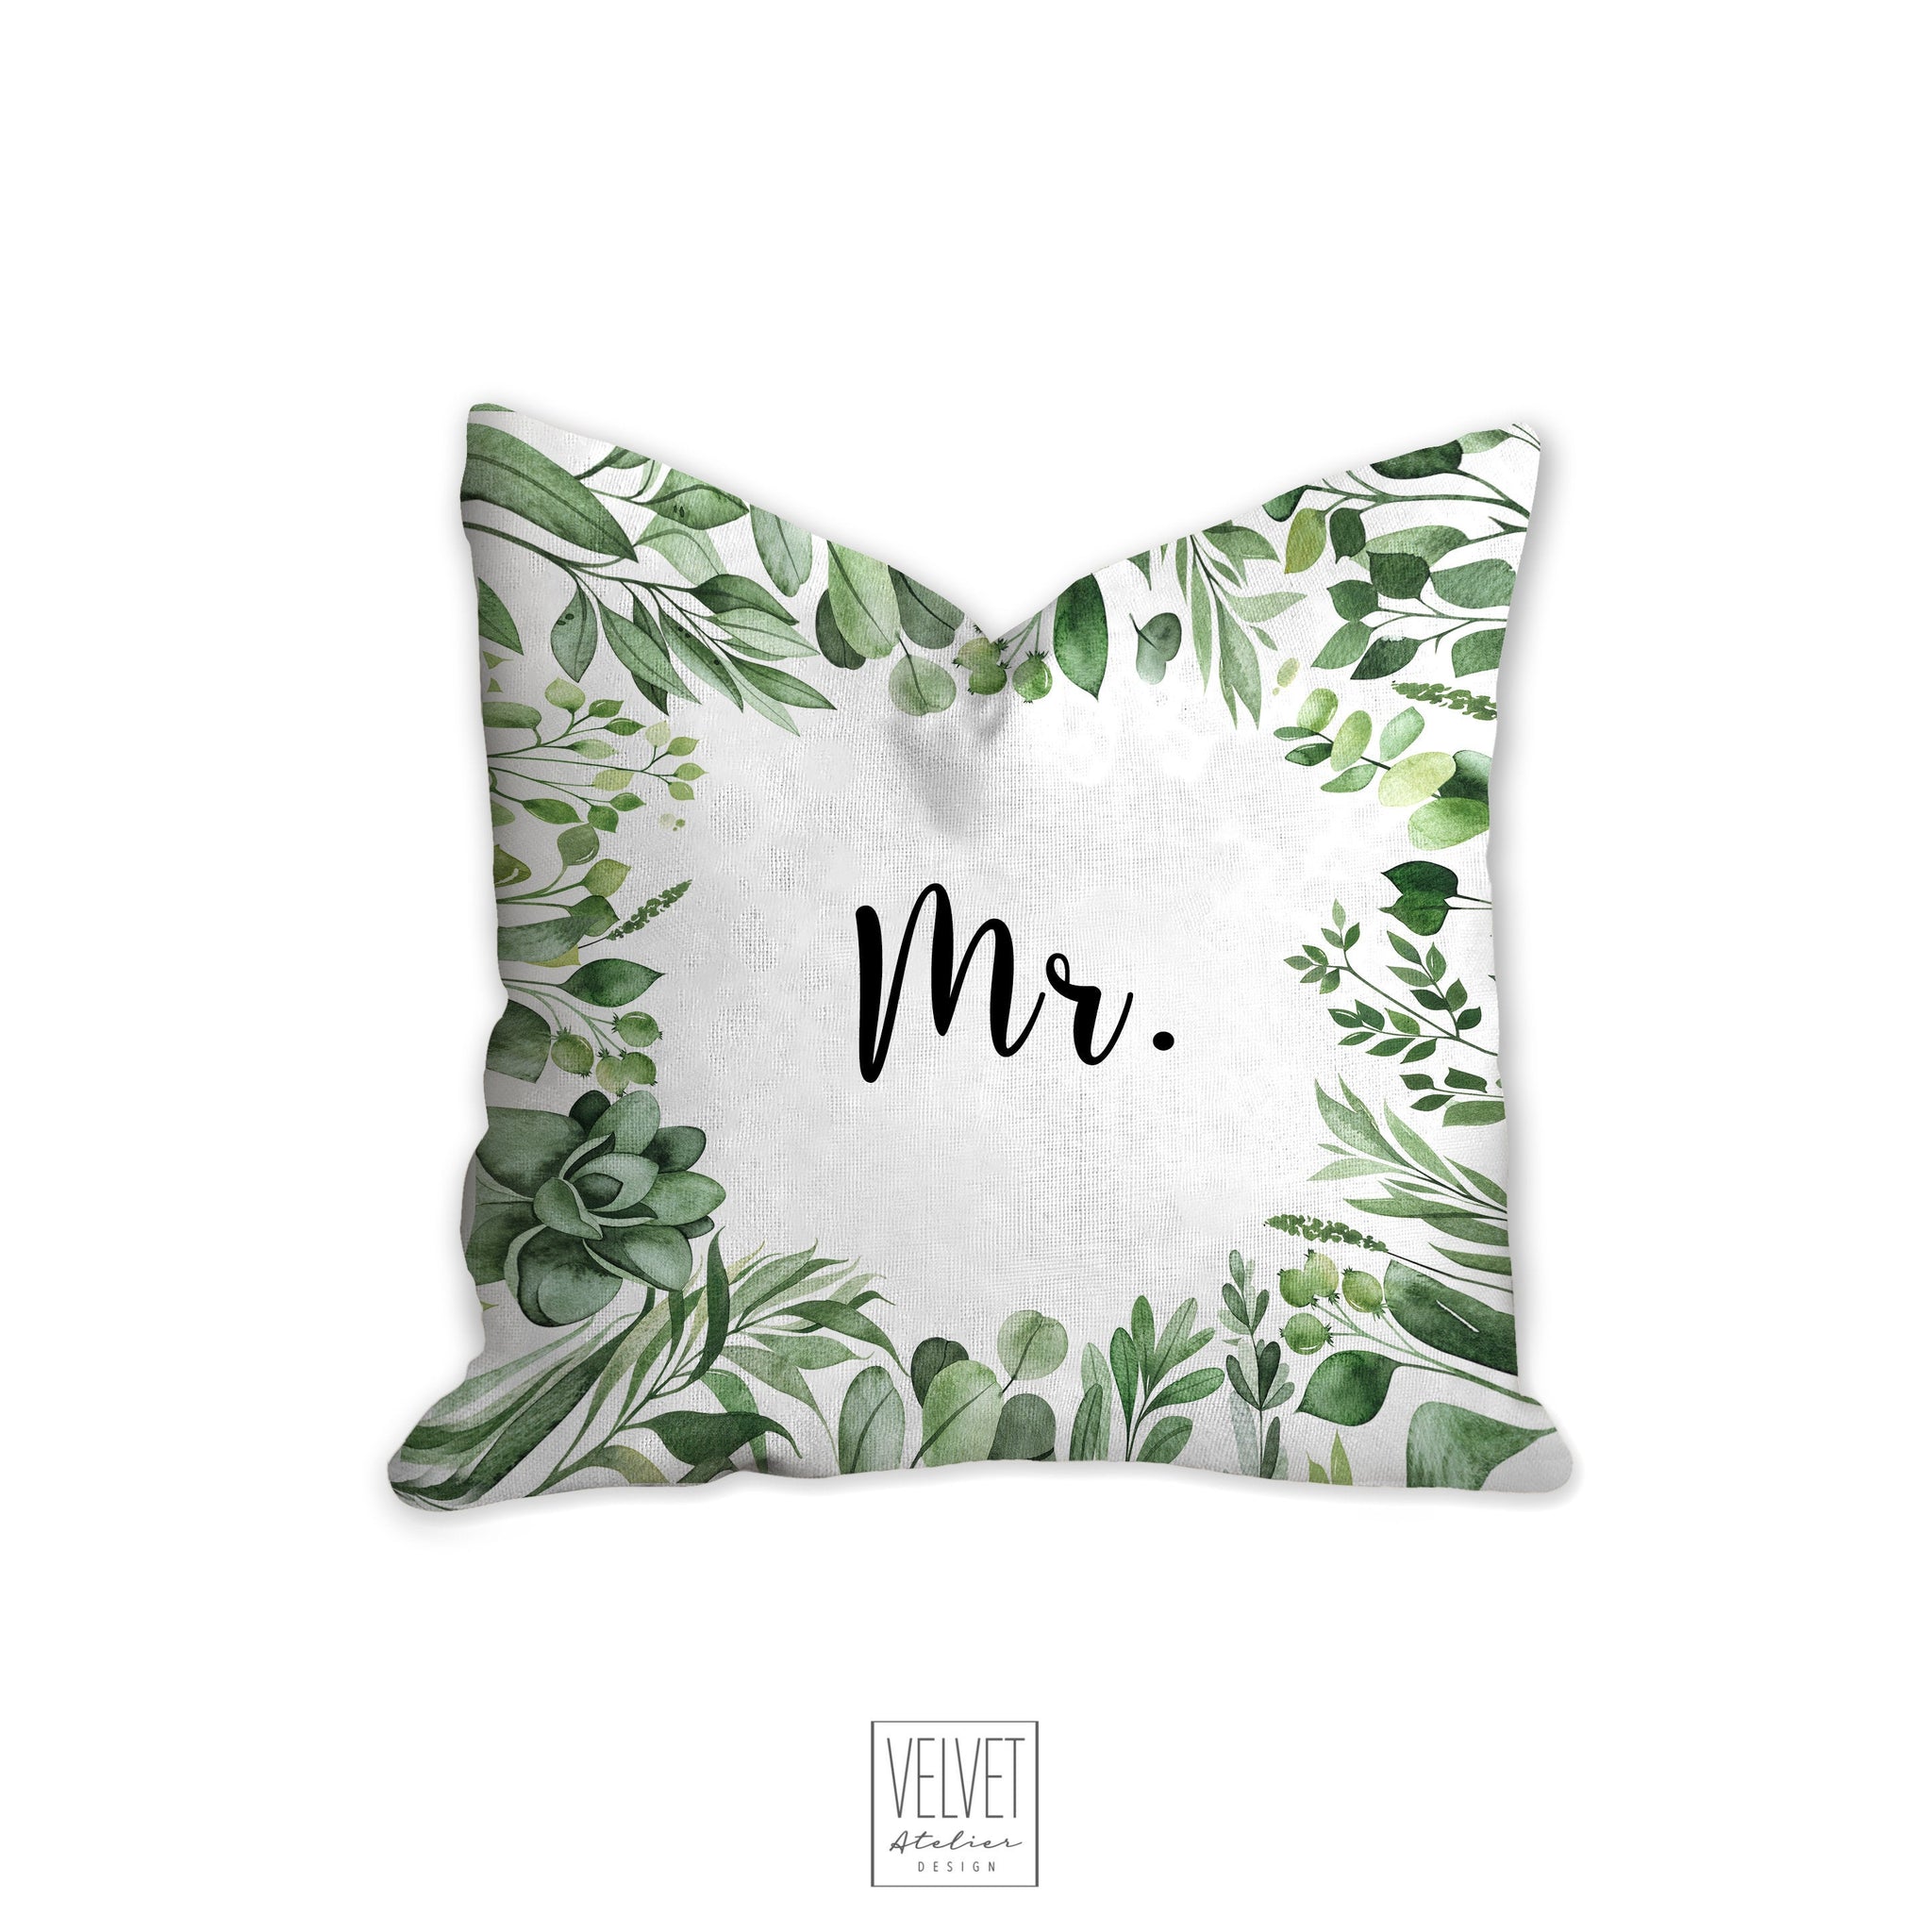 Easy to Make Customized Wedding Date Pillowsa personalized gift idea 